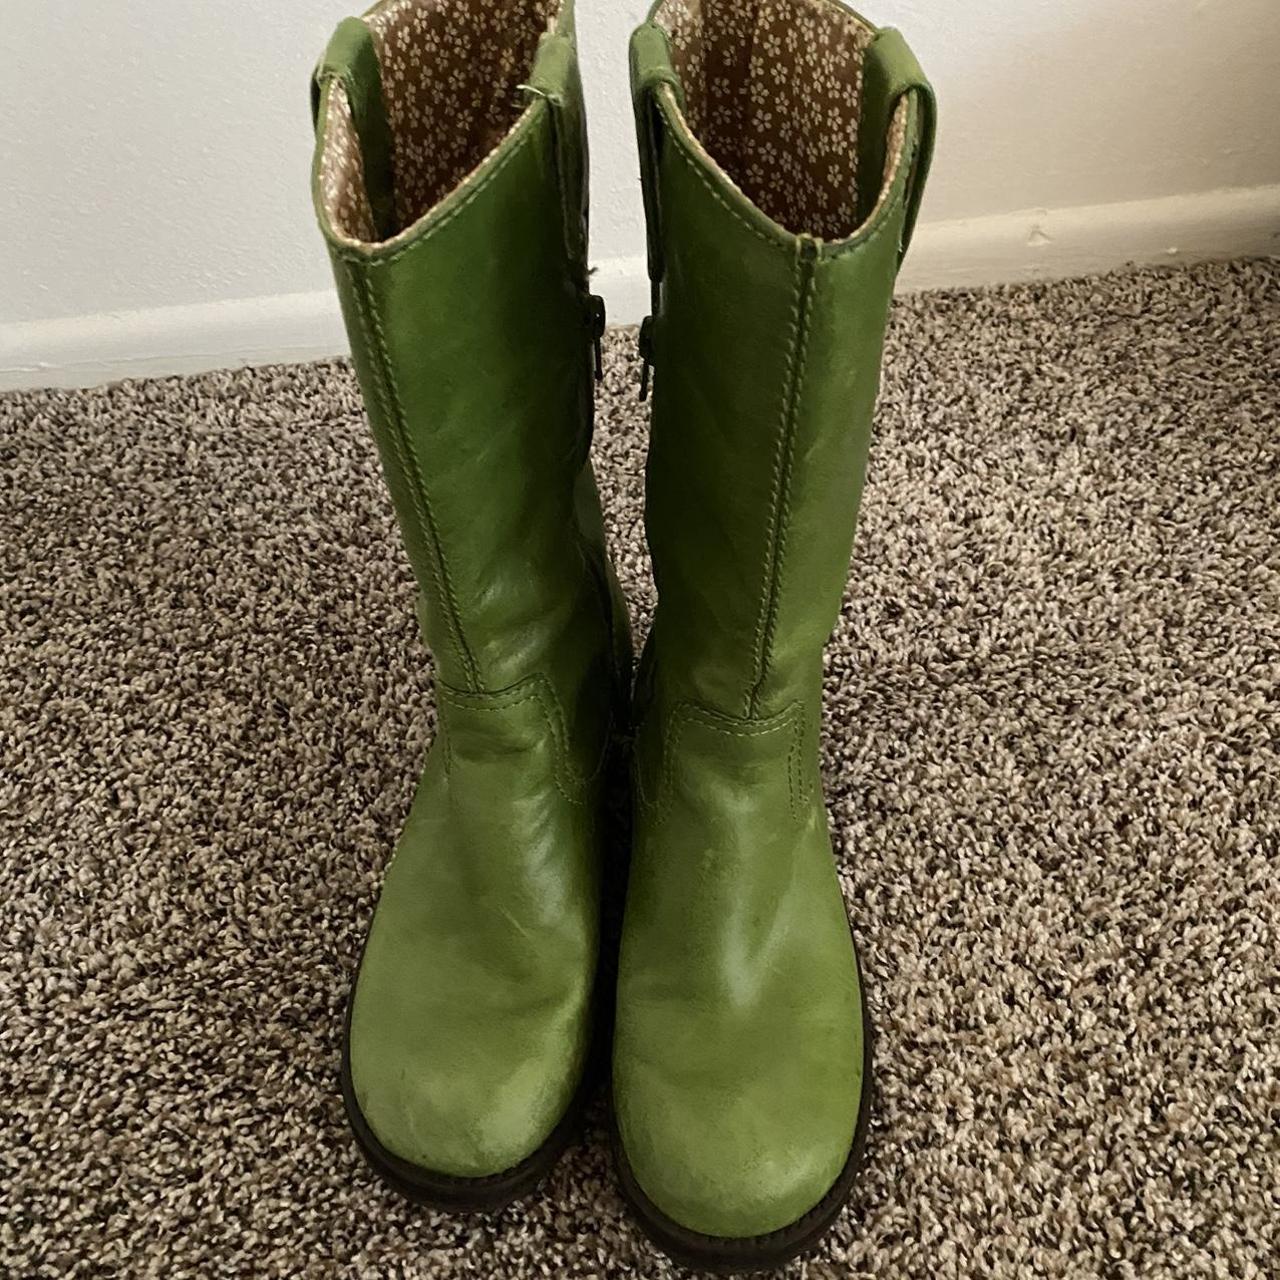 Vintage green Steve Madden boots. These are so... - Depop